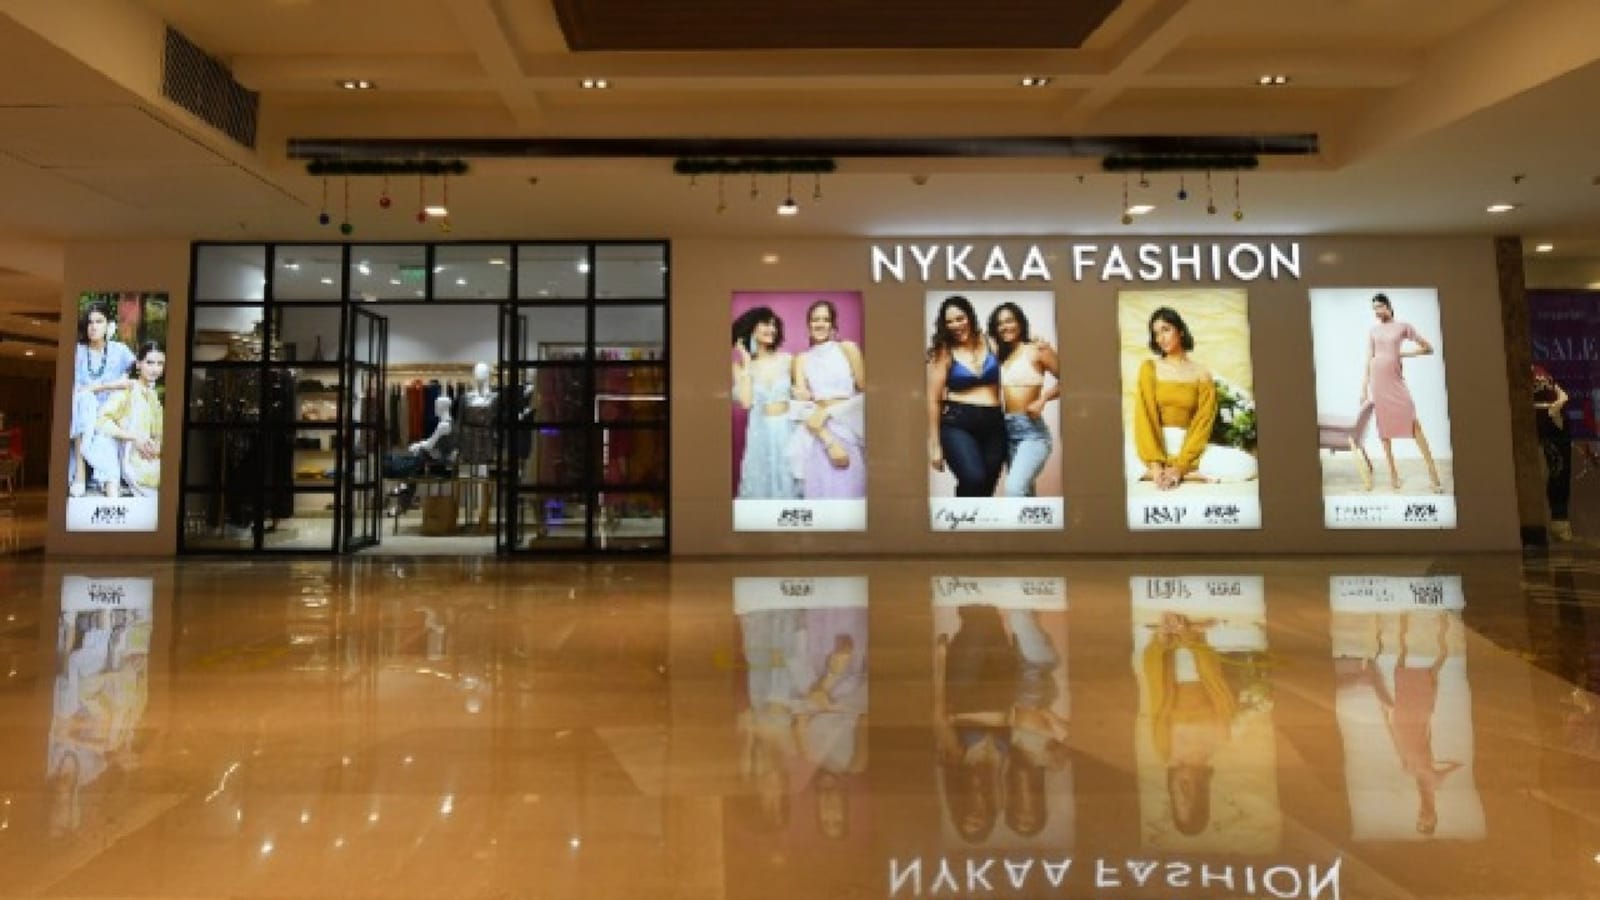 https://images.moneycontrol.com/static-mcnews/2021/08/nykaa-fashion.jpg?impolicy=website&width=1600&height=900